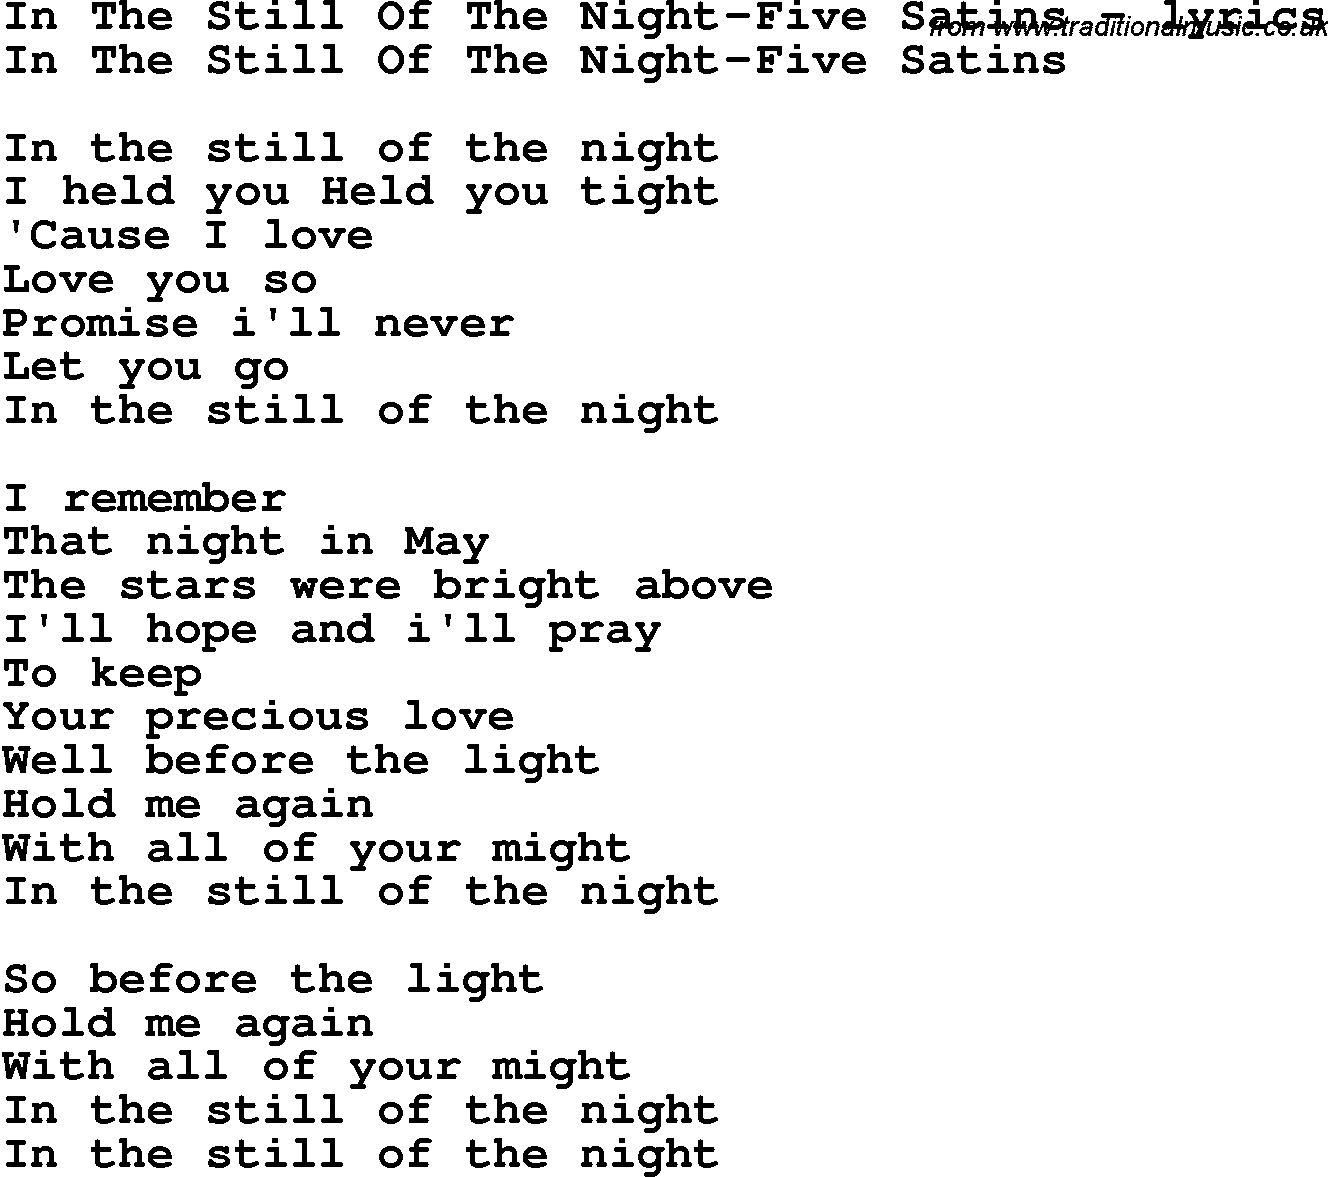 In The Still Of The Night Five Satins Ly 